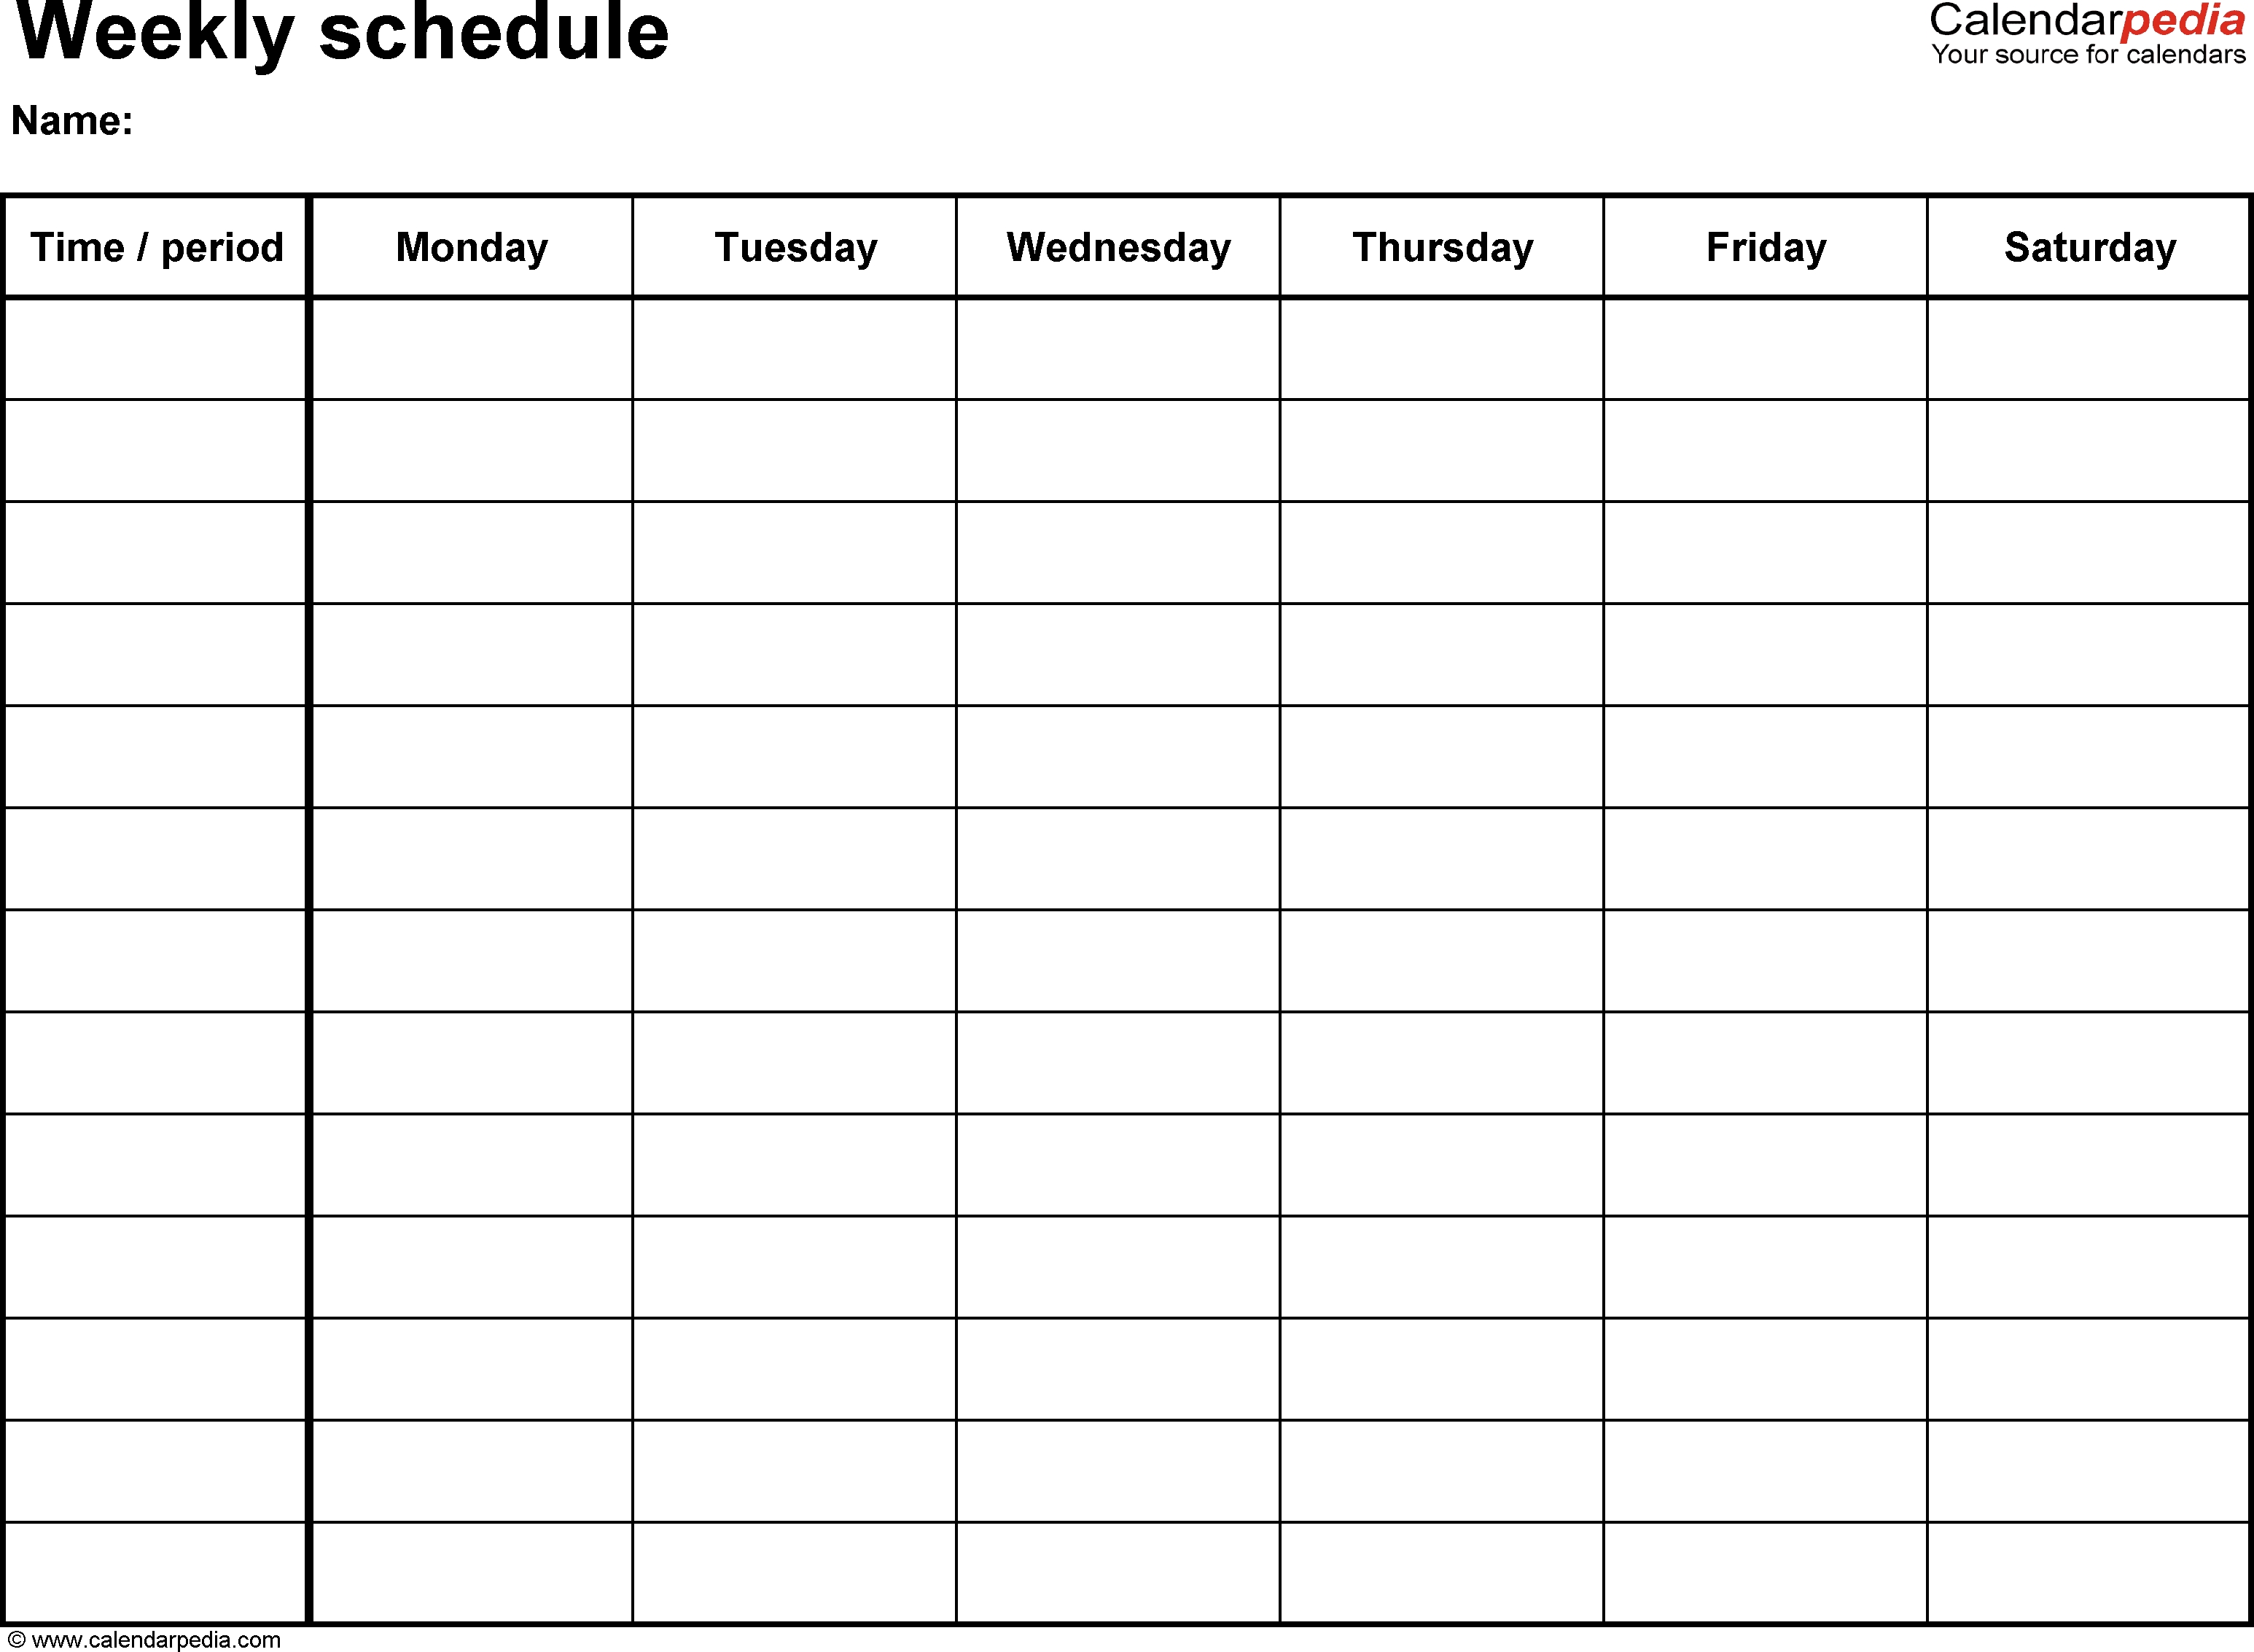 Free Weekly Schedule Templates For Pdf - 18 Templates pertaining to Printable Weekly Calendar Monday Start